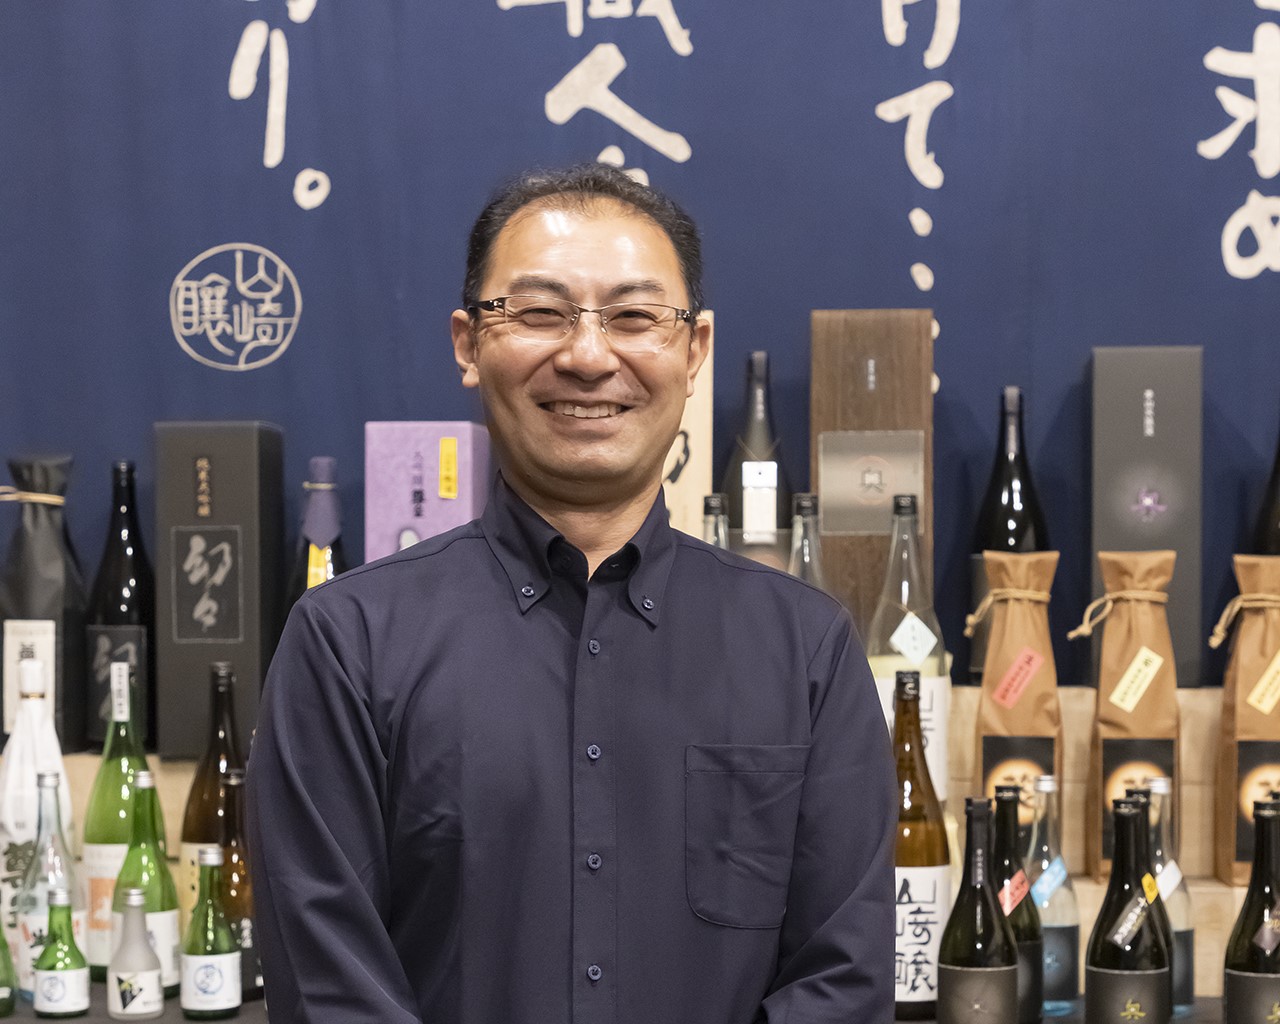 Brewing sake with locally produced rice. Yamazaki Limited Partnership, the brewer of “Sonno”.